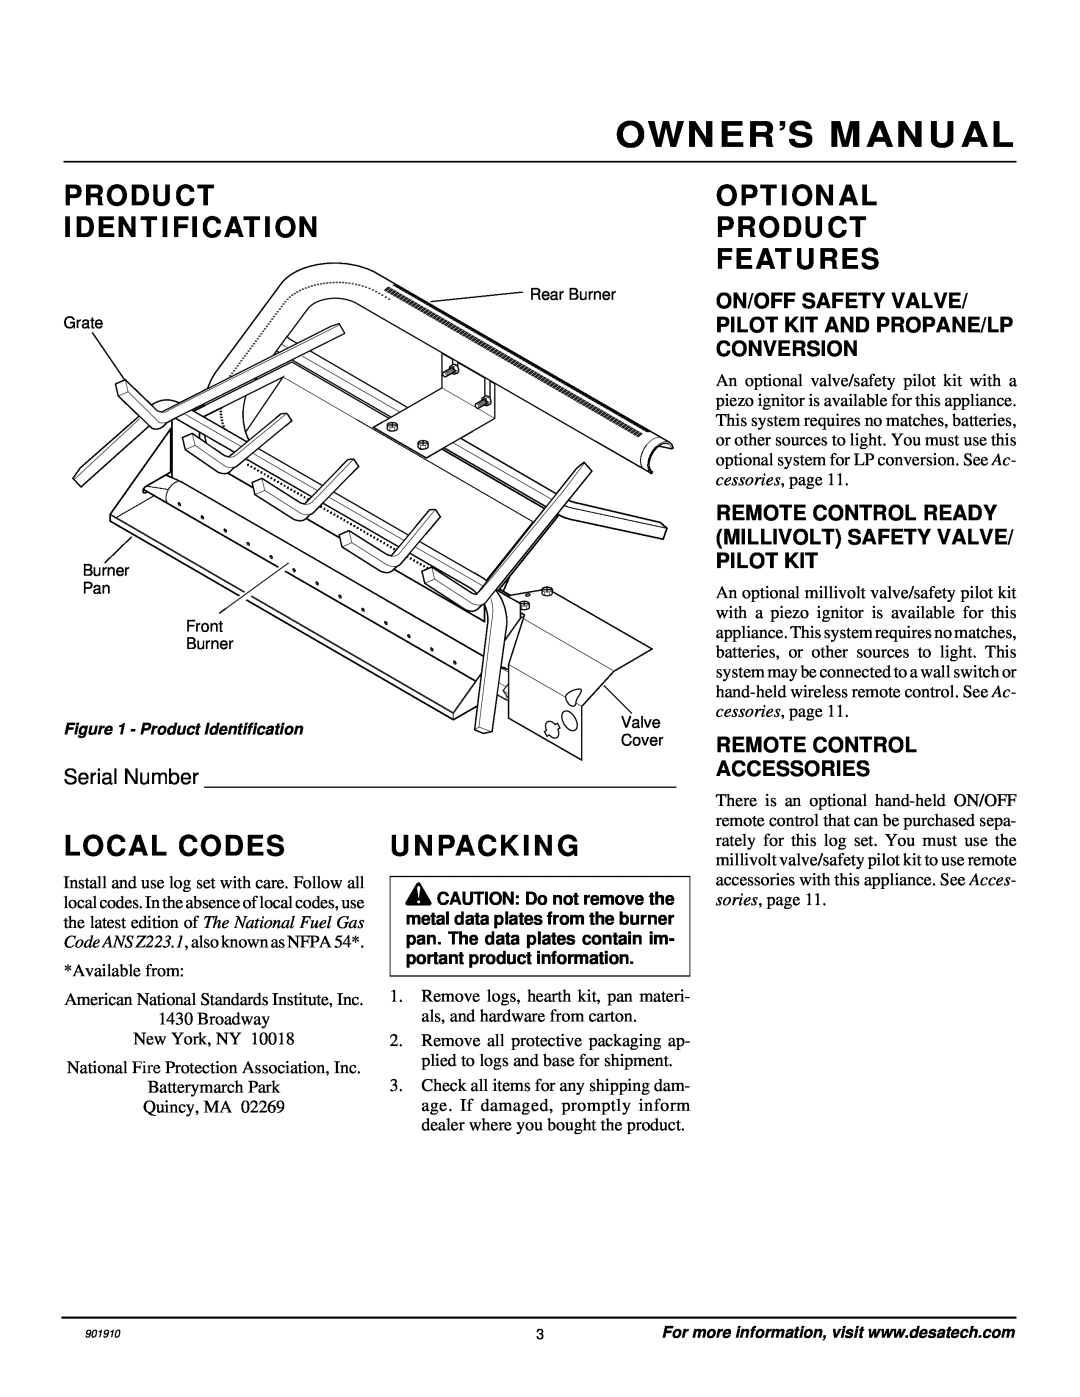 Desa 901910-01A.pdf installation manual Product Identification, Local Codes, Unpacking, Optional Product Features 